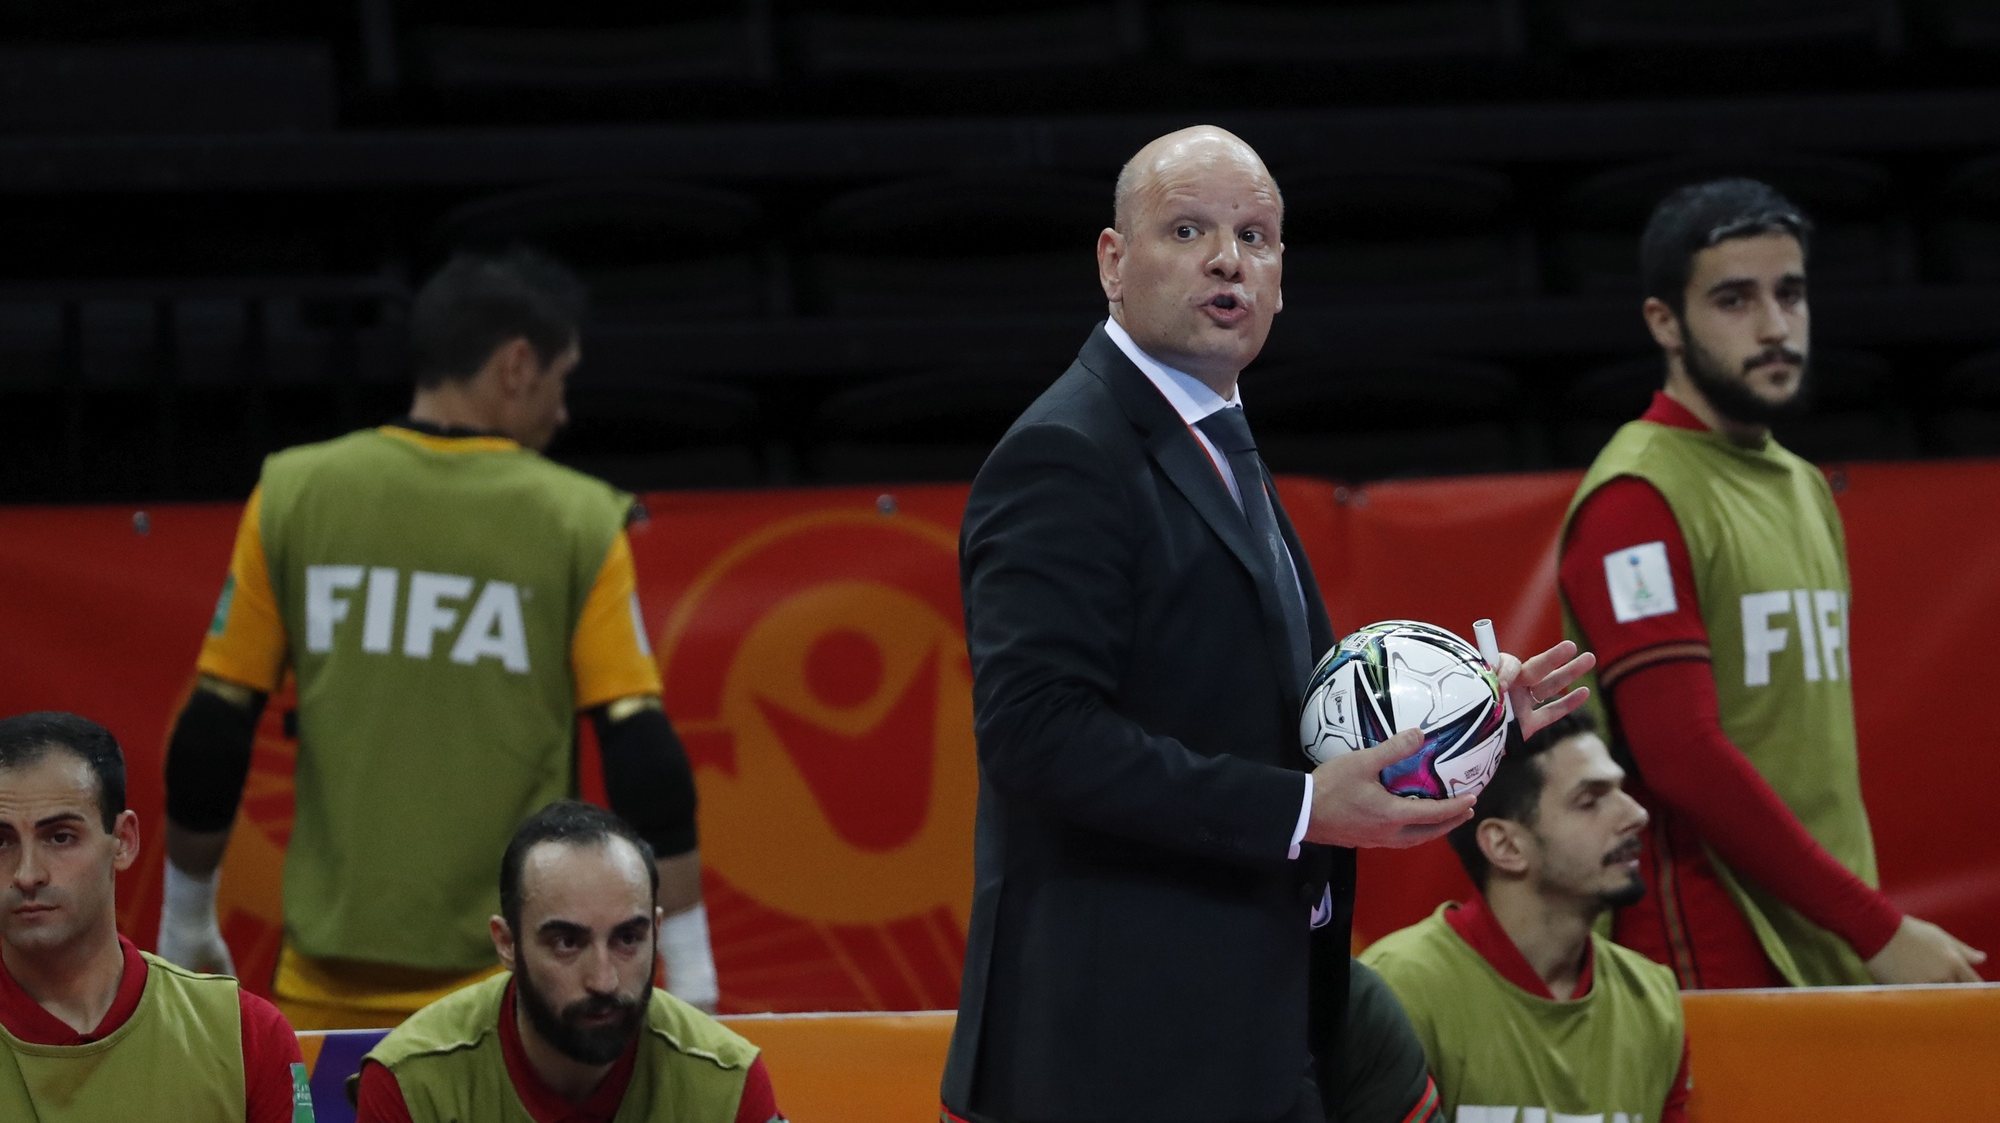 epa09504217 Head coach of Portugal&#039;s national futsal team Jorge Braz reacts during FIFA Futsal World Cup Lithuania 2021 final between Argentina and Portugal in Kaunas, Lithuania, 03 October 2021.  EPA/TOMS KALNINS